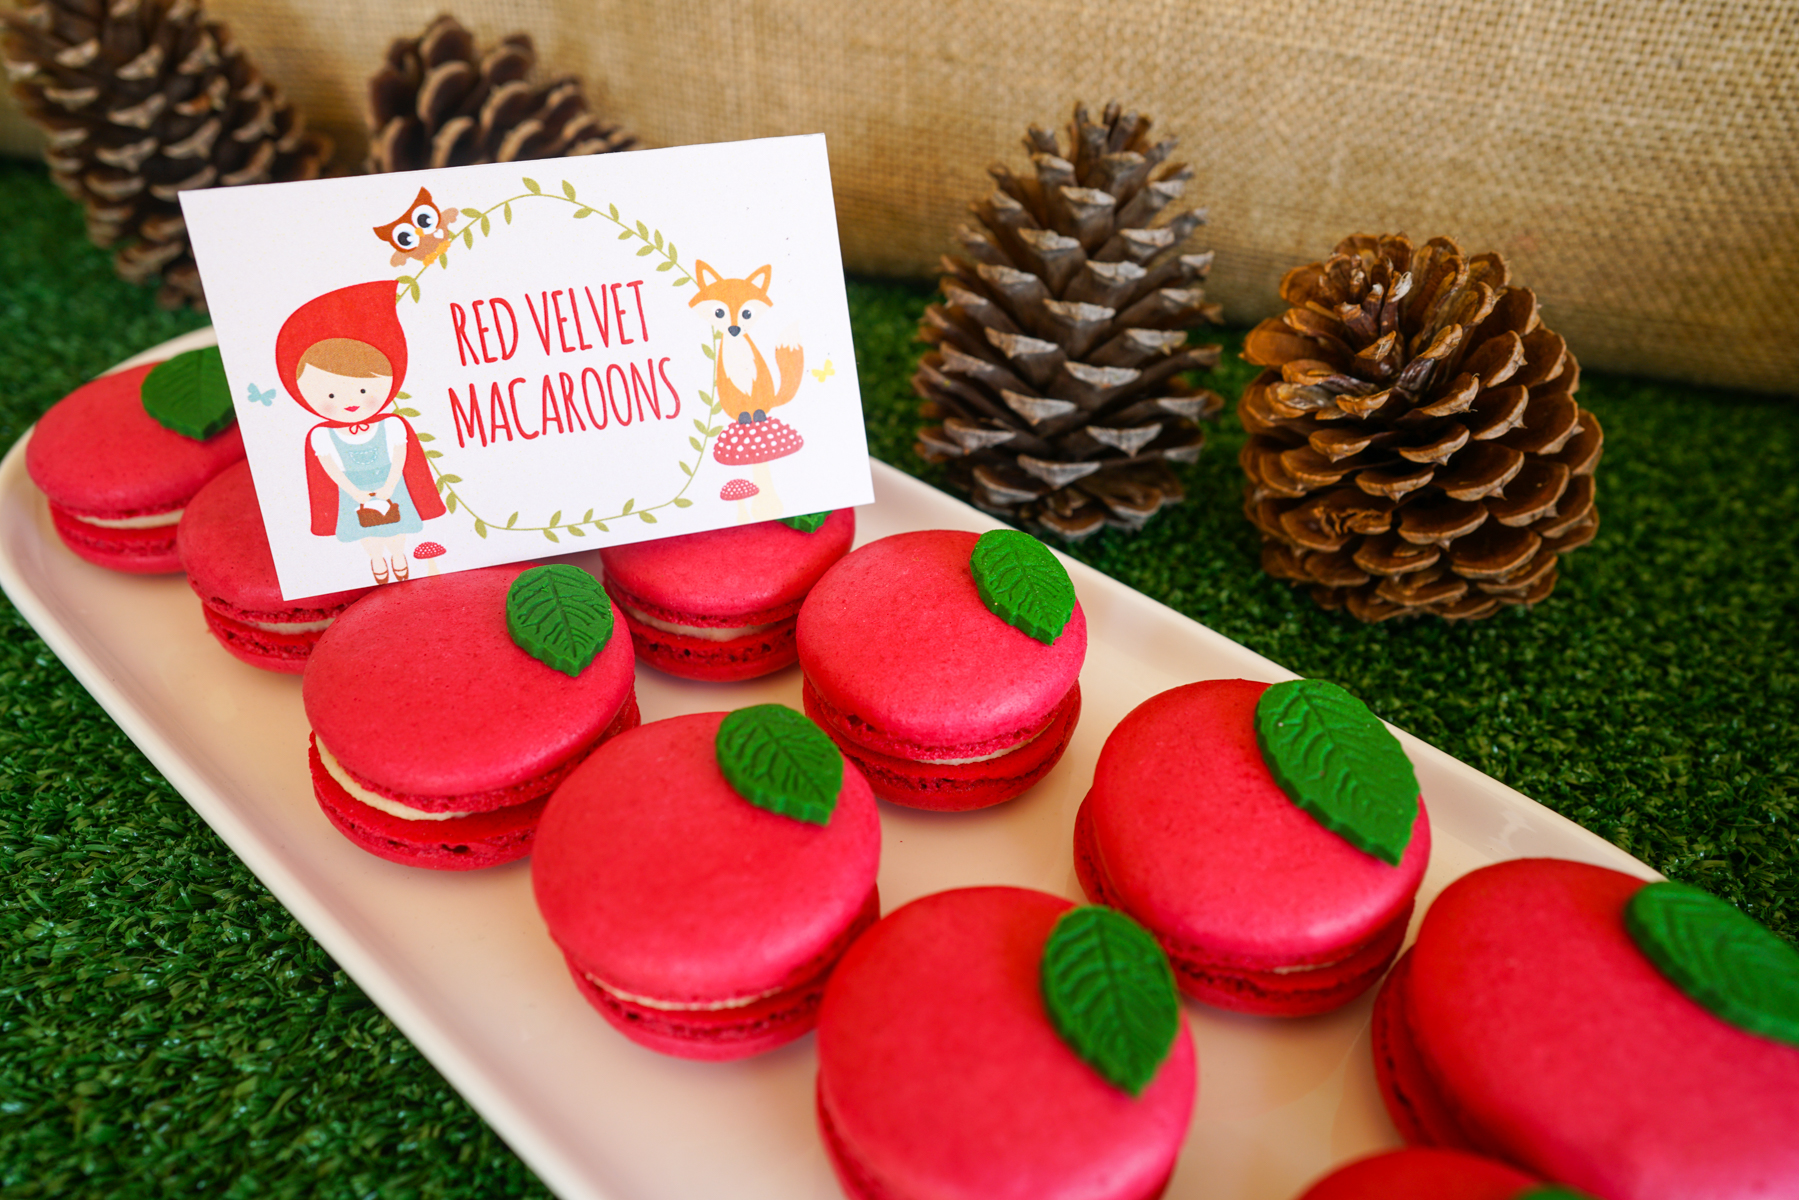 Little Red Riding Hood Party Food Labels with red velvet macarons finished off with a green leaf to look like apples